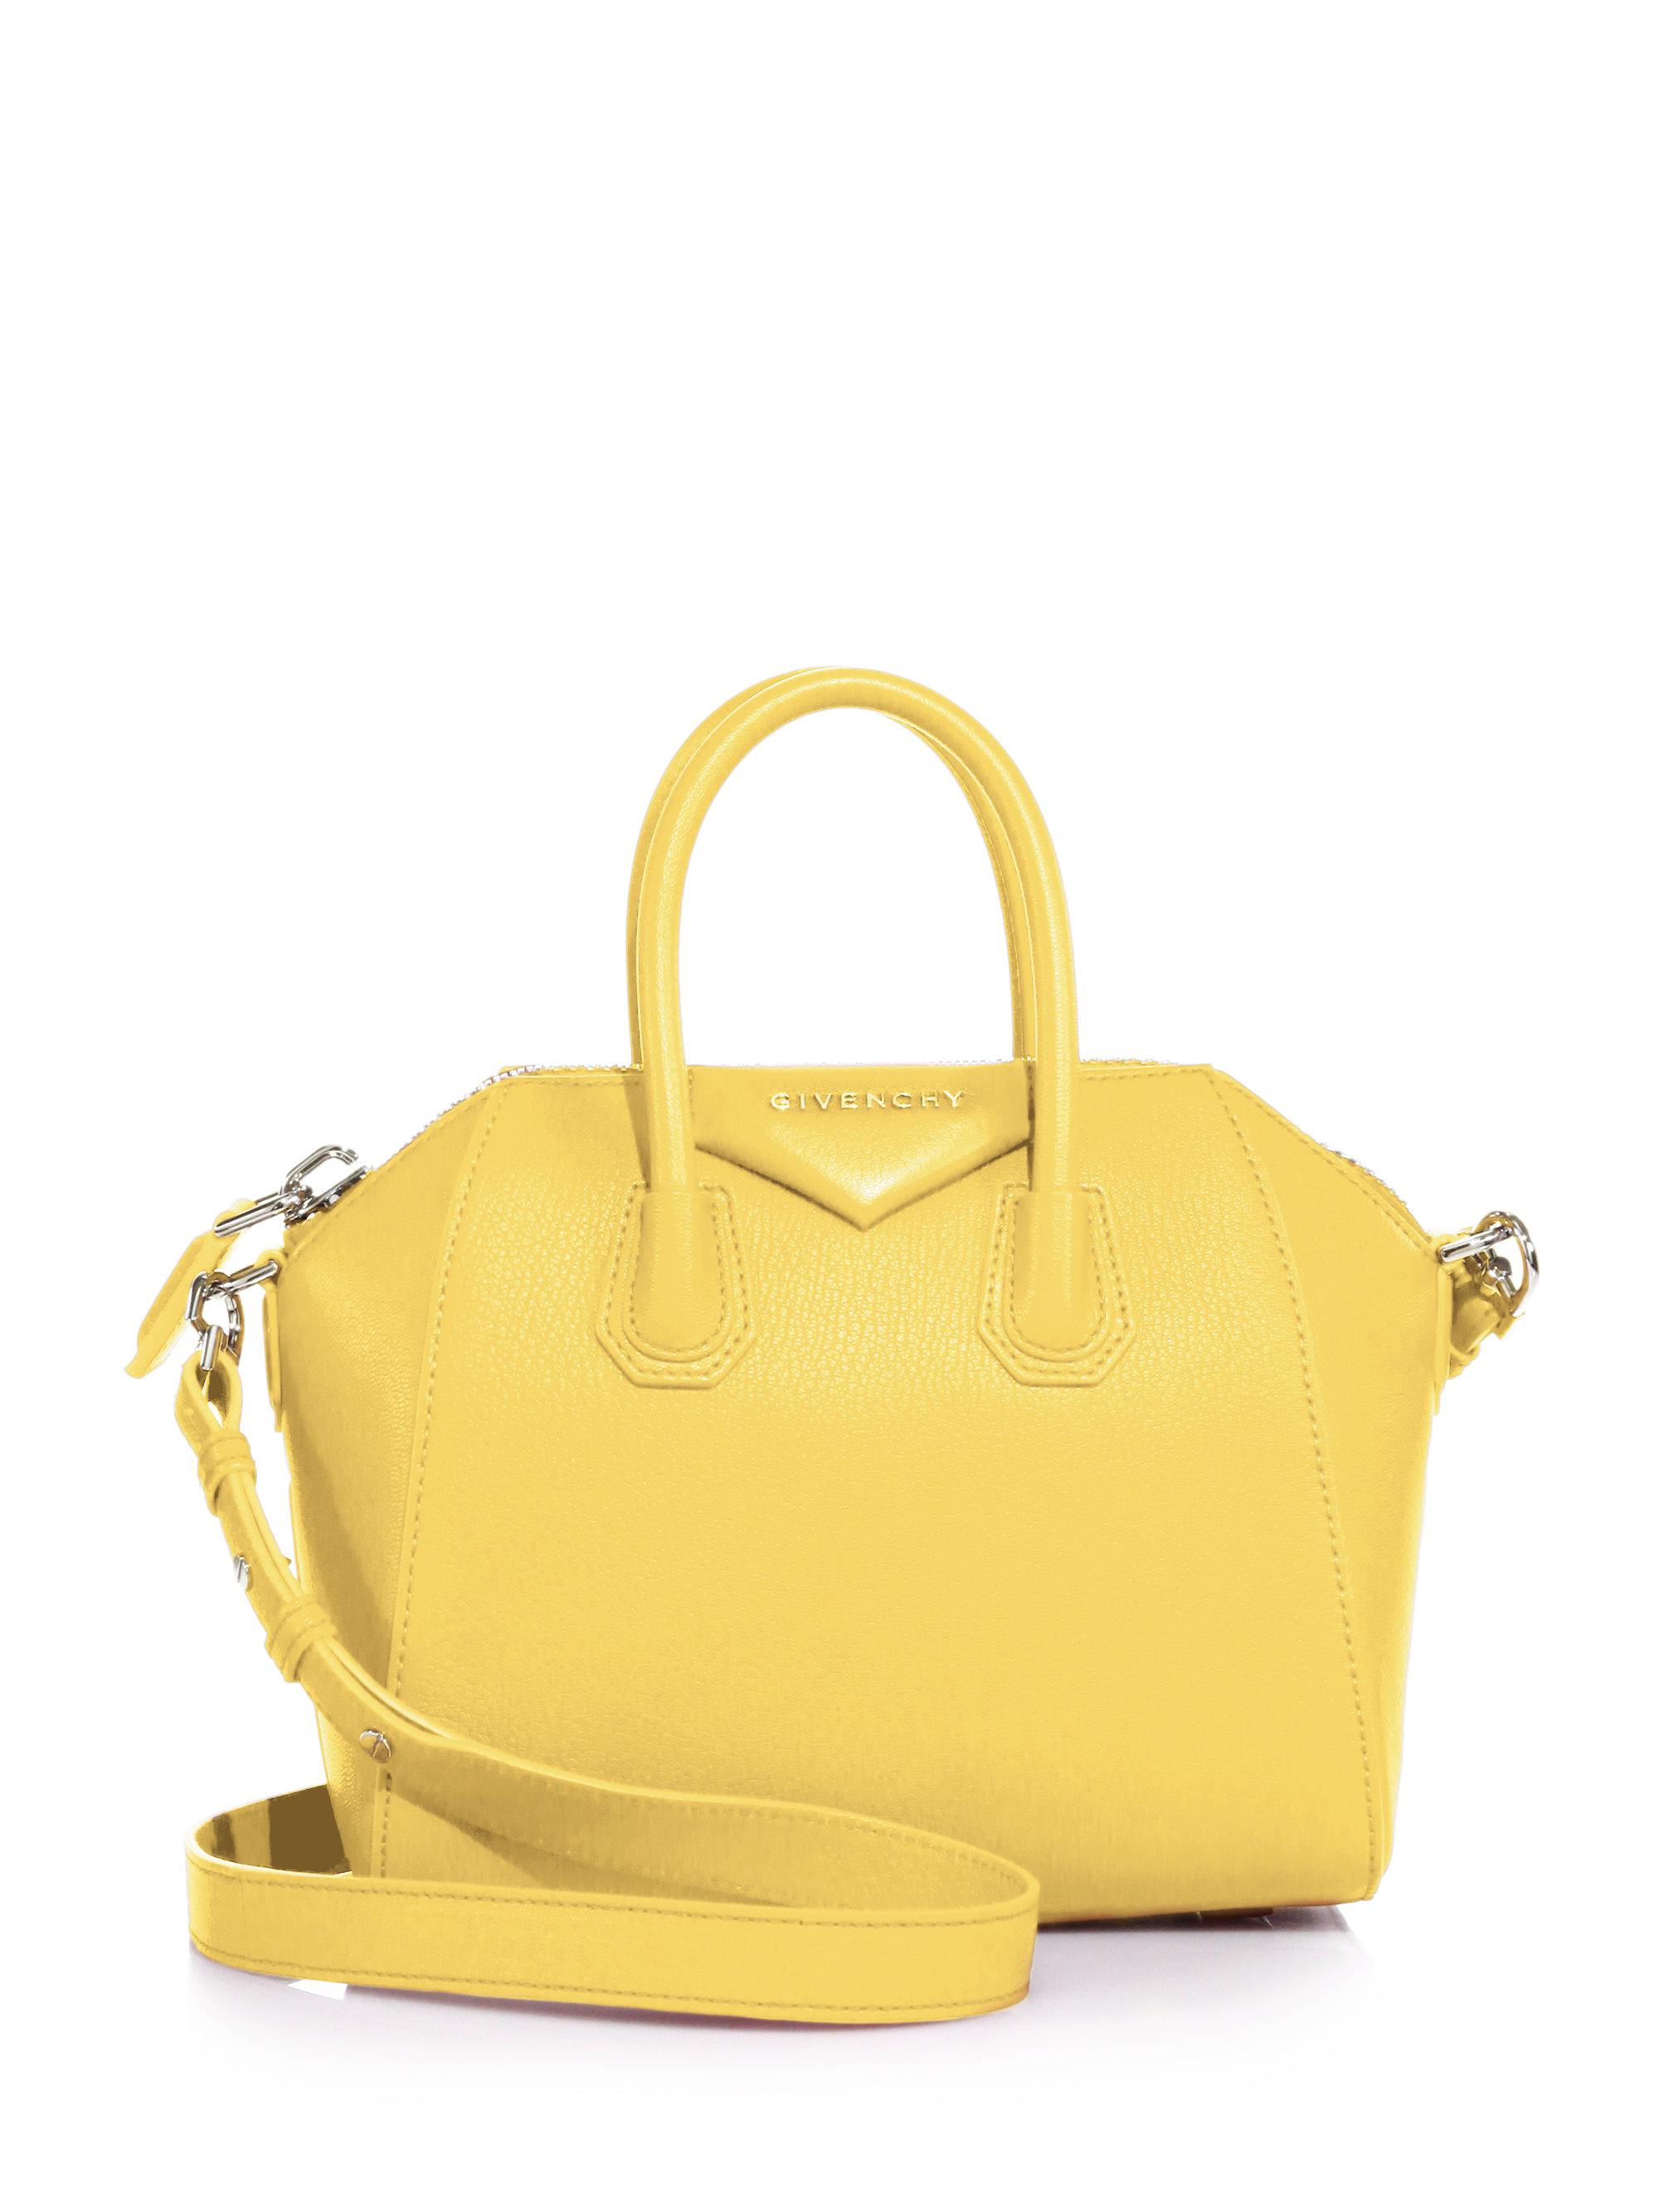 Total 79+ imagen givenchy bag yellow